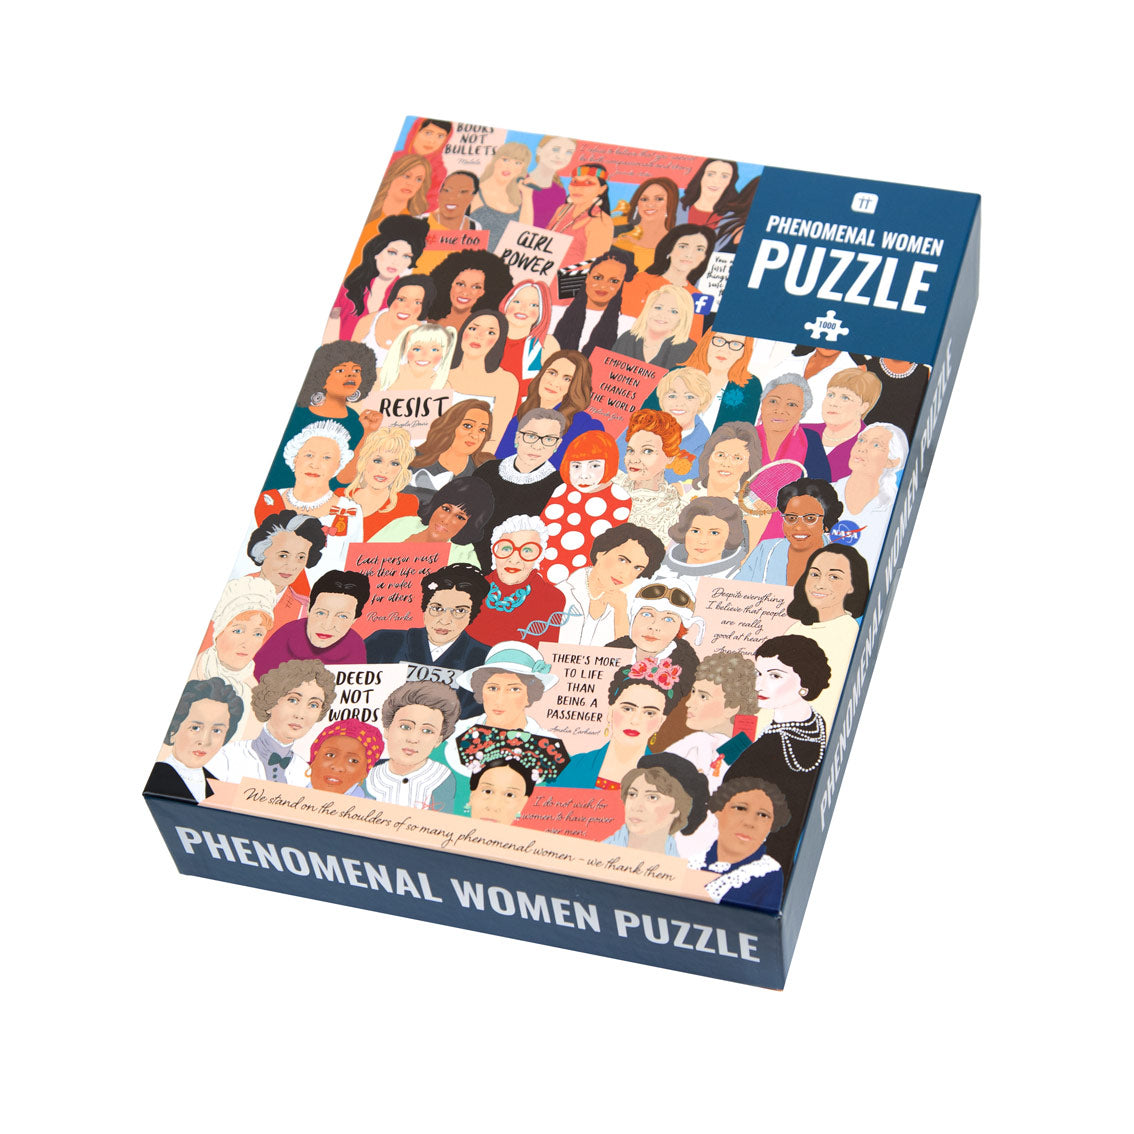 An image of a puzzle box where the jigsaw image is phenomenal women. Each woman is illustrated in a crowd where you see their head and shoulders.